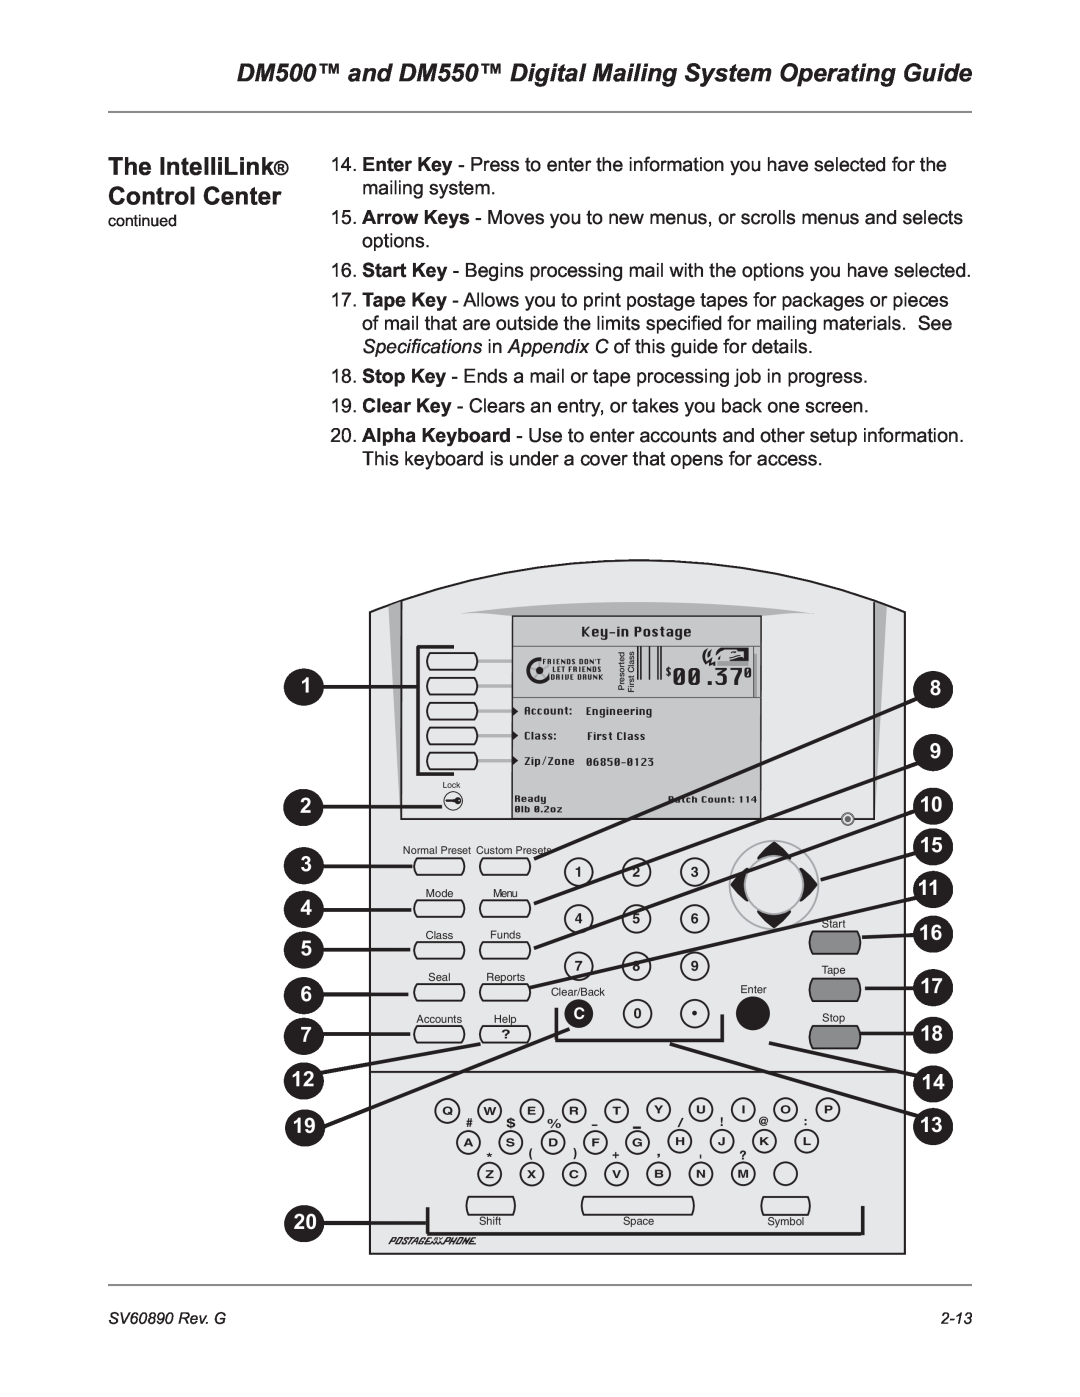 Pitney Bowes manual The IntelliLink, Control Center, DM500 and DM550 Digital Mailing System Operating Guide 